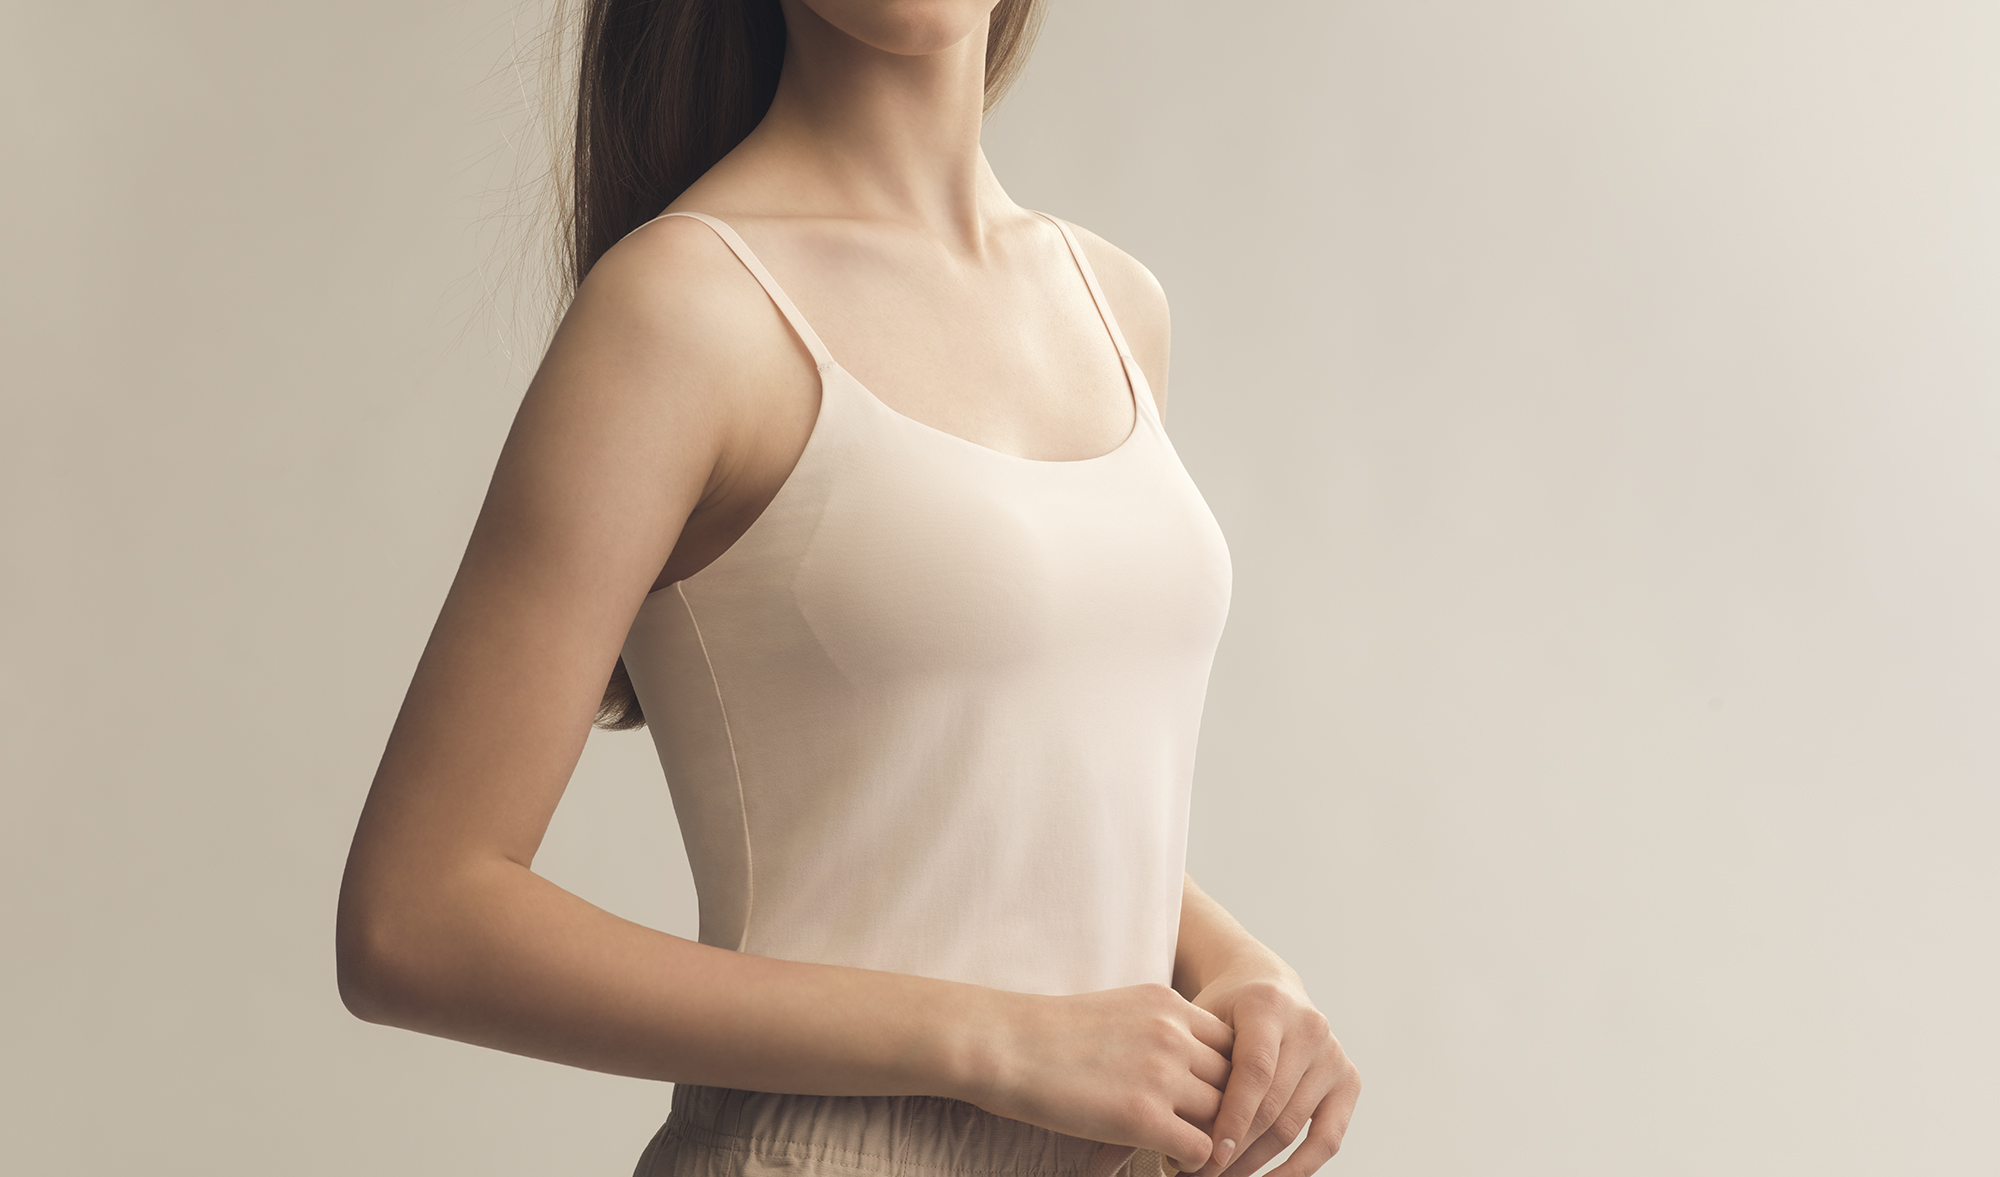 Uniqlo Canada on X: The AIRism Bra Camisole has highly supportive